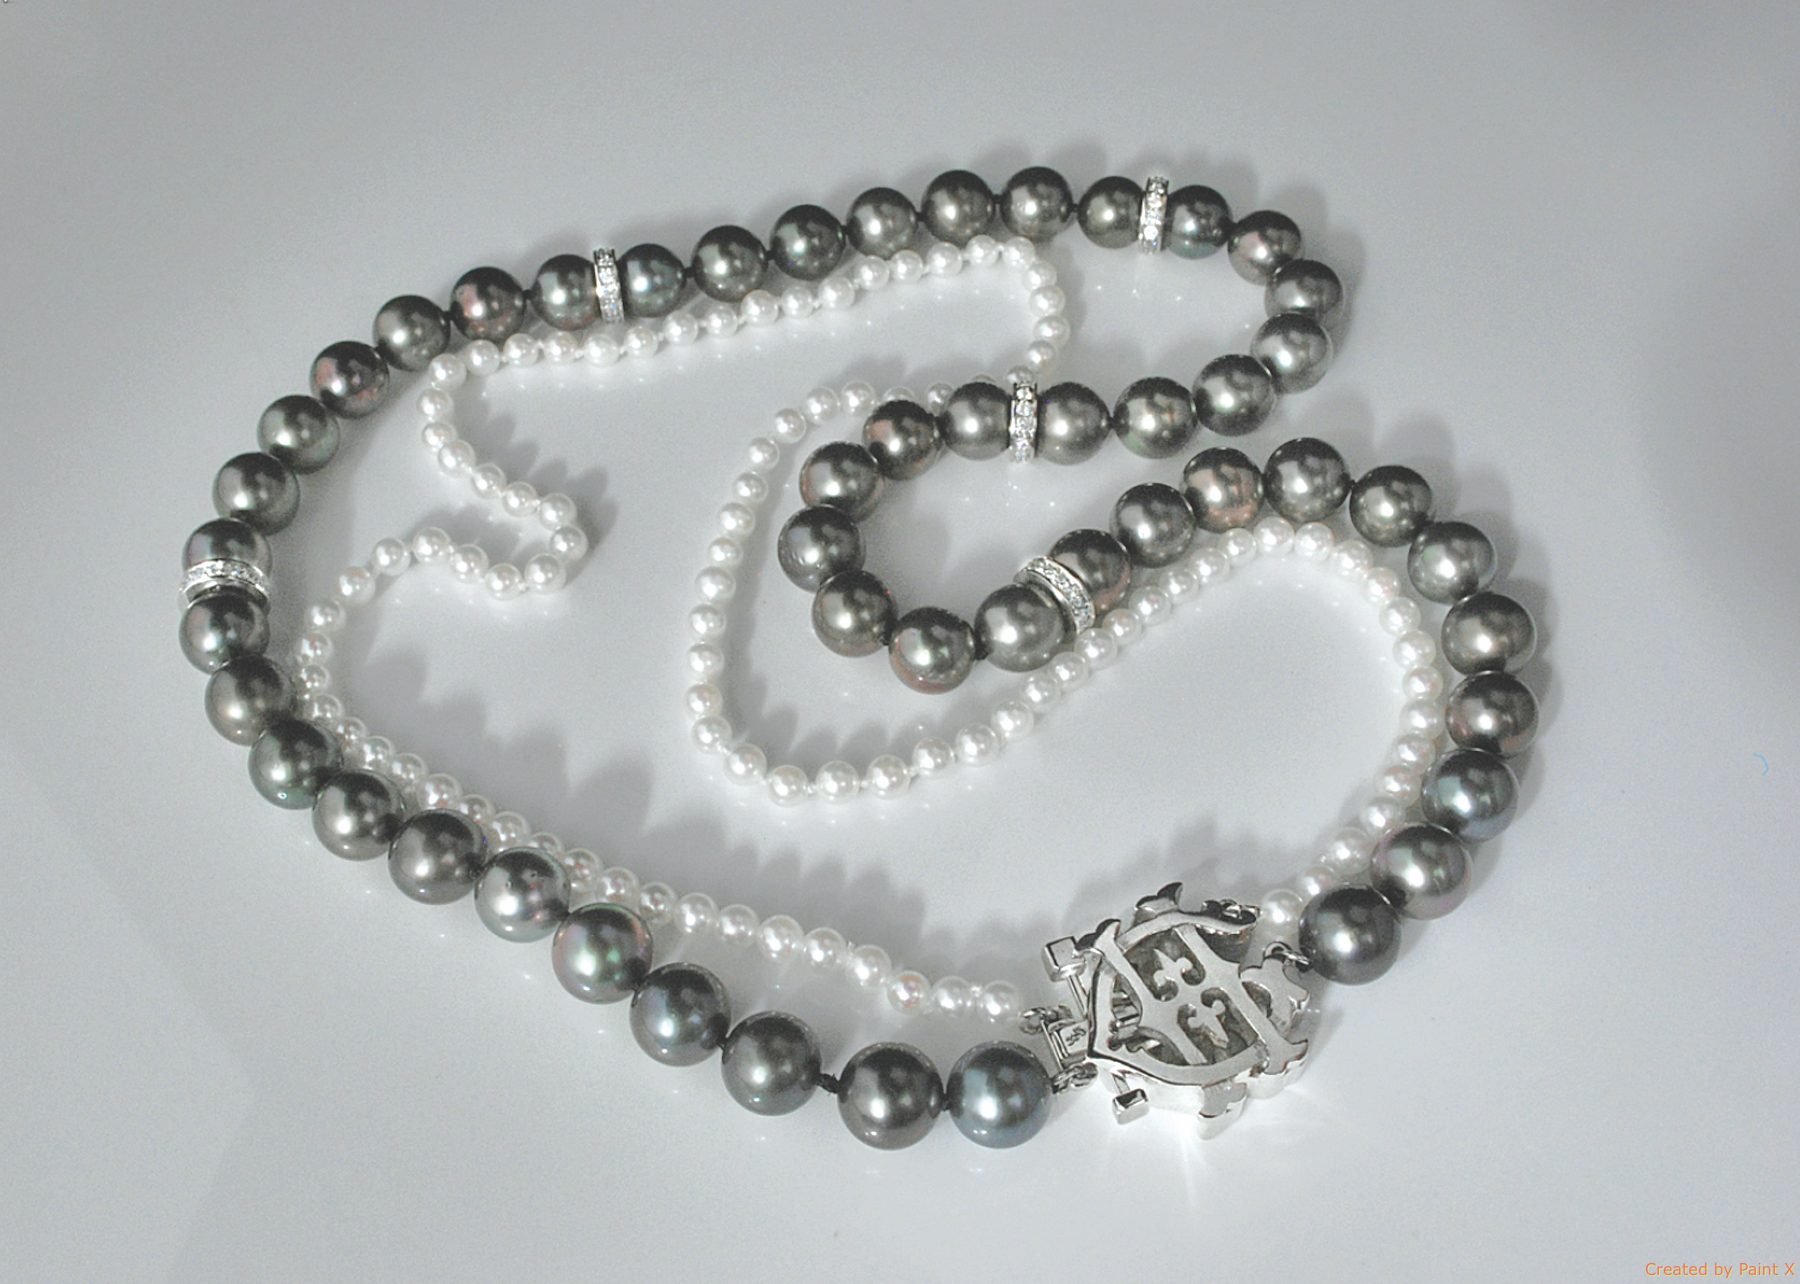 Crafting a Custom Pearl Necklace